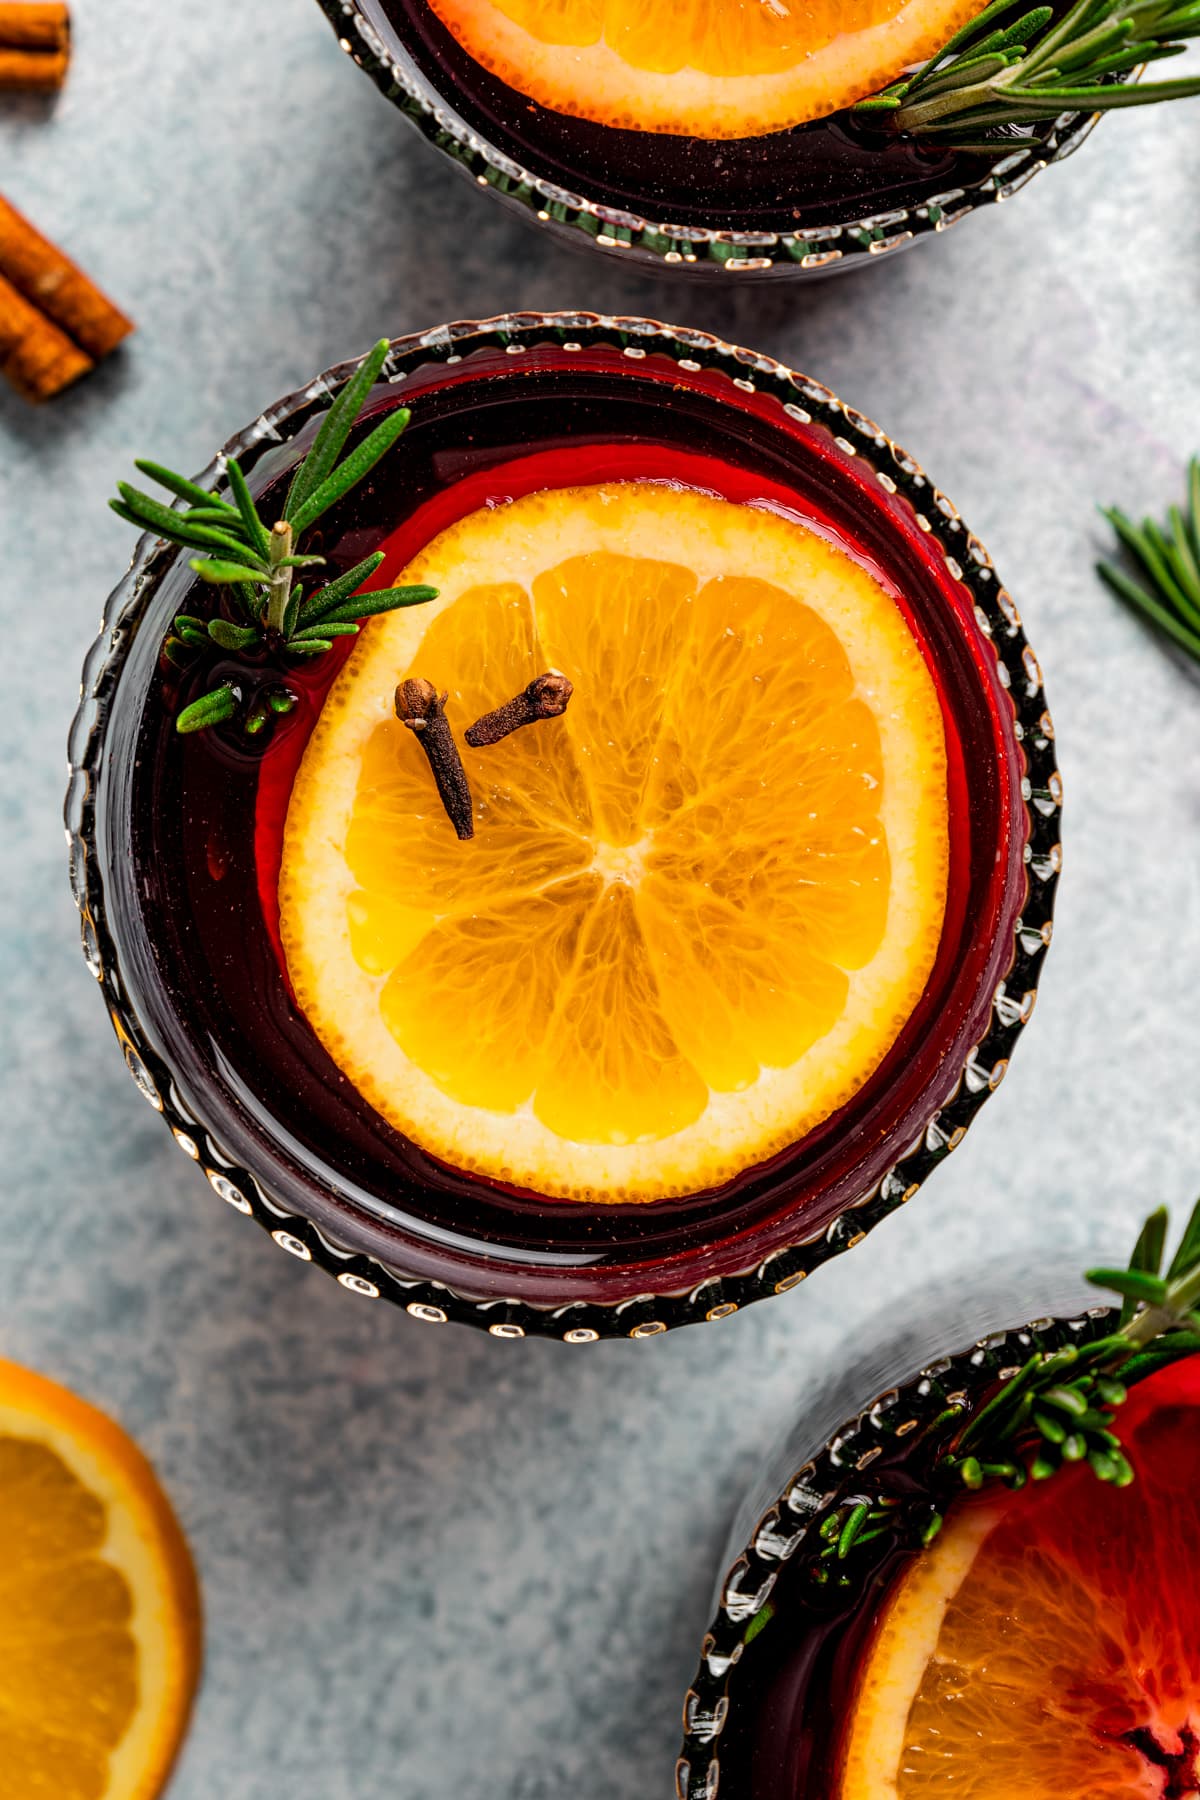 Overhead view of mulled wine served in glasses garnished with orange slices.